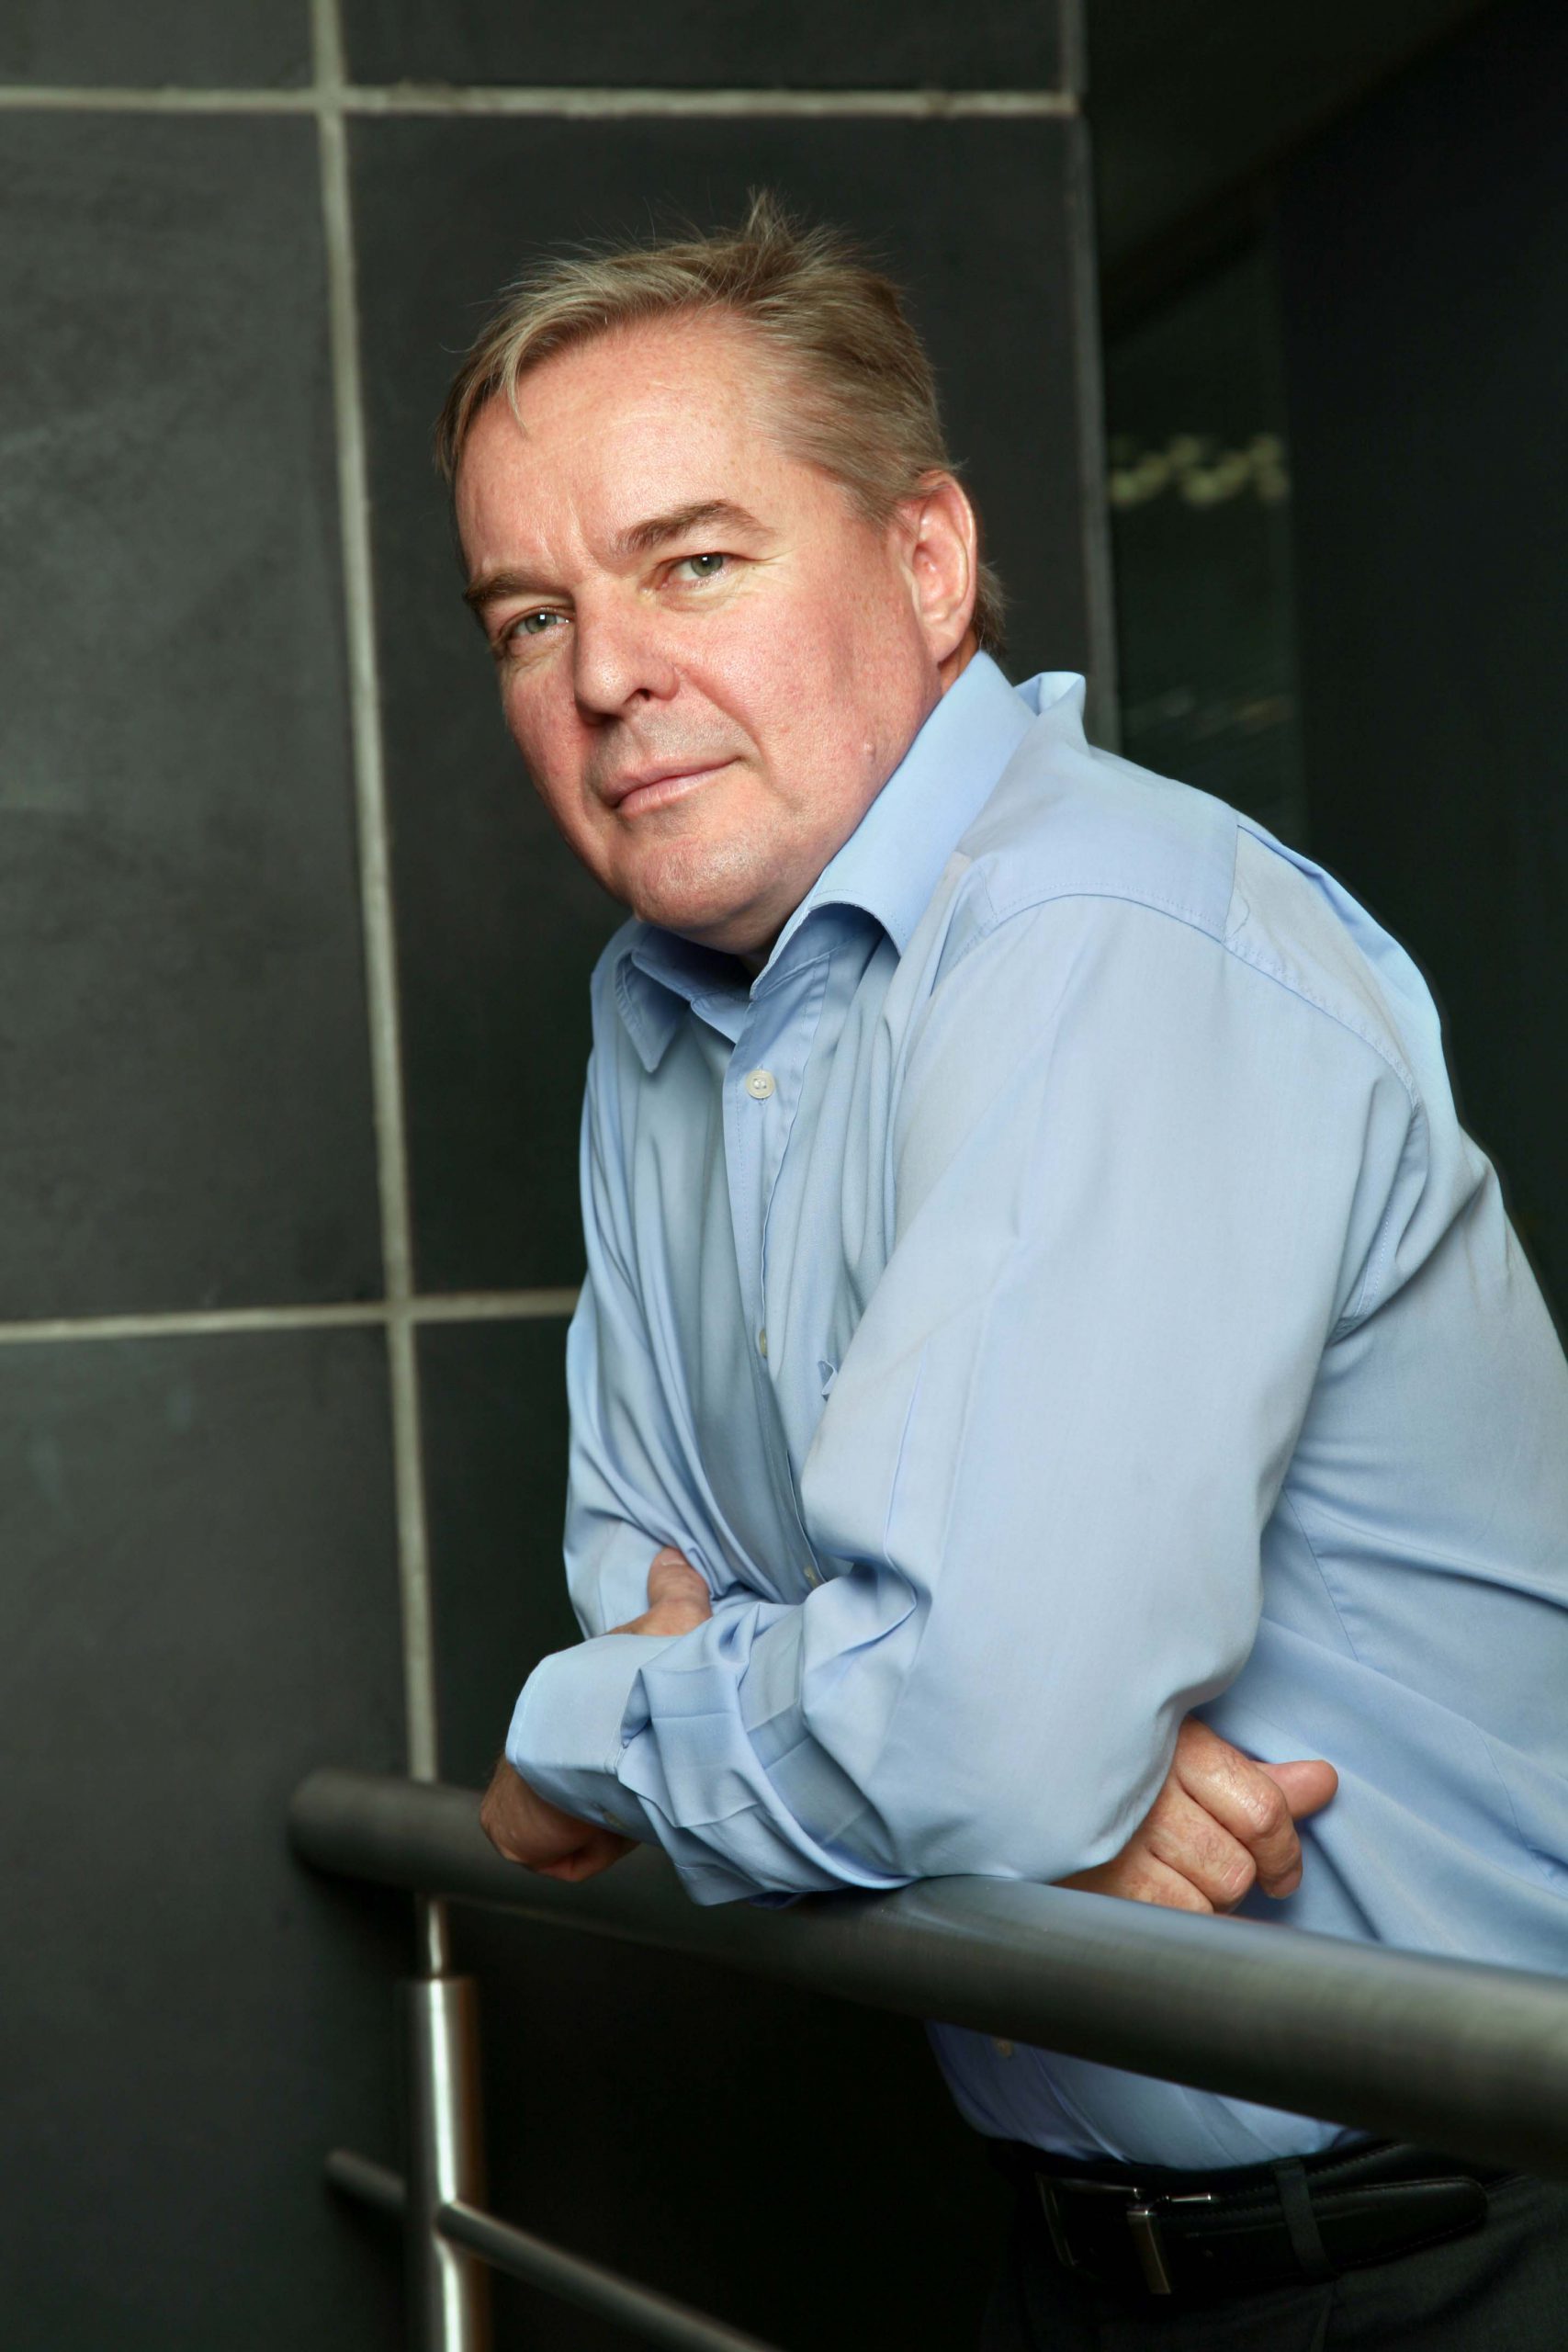 David Longe, Co-Founder and CEO of Absolute Systems